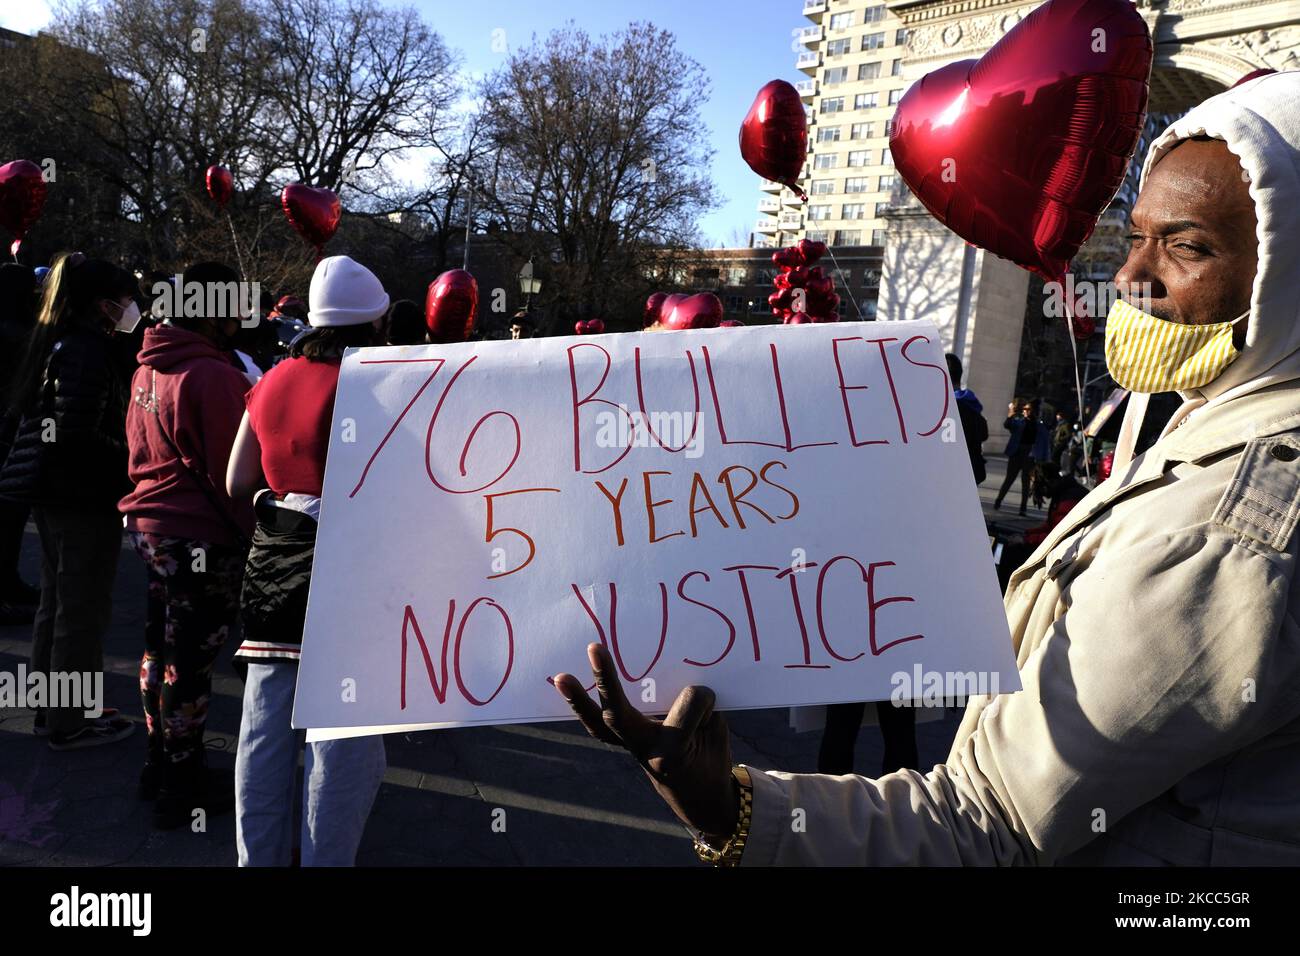 People march through the streets with balloons and placards towards Washington Square in memory of Jamarion Robinson who was shot 76 times by federal agents on April 3, 2021 in New York City, USA . According to the Atlanta Police, an arrest warrant was issued to be executed for Robinson on August 5, 2016 in East Point Georgia, by federal agents in connection with various crimes, including pointing a gun at officers, attempting to set a fire and multiple traffic violations. Robinson was diagnosed with paranoid schizophrenia . (Photo by John Lamparski/NurPhoto) Stock Photo